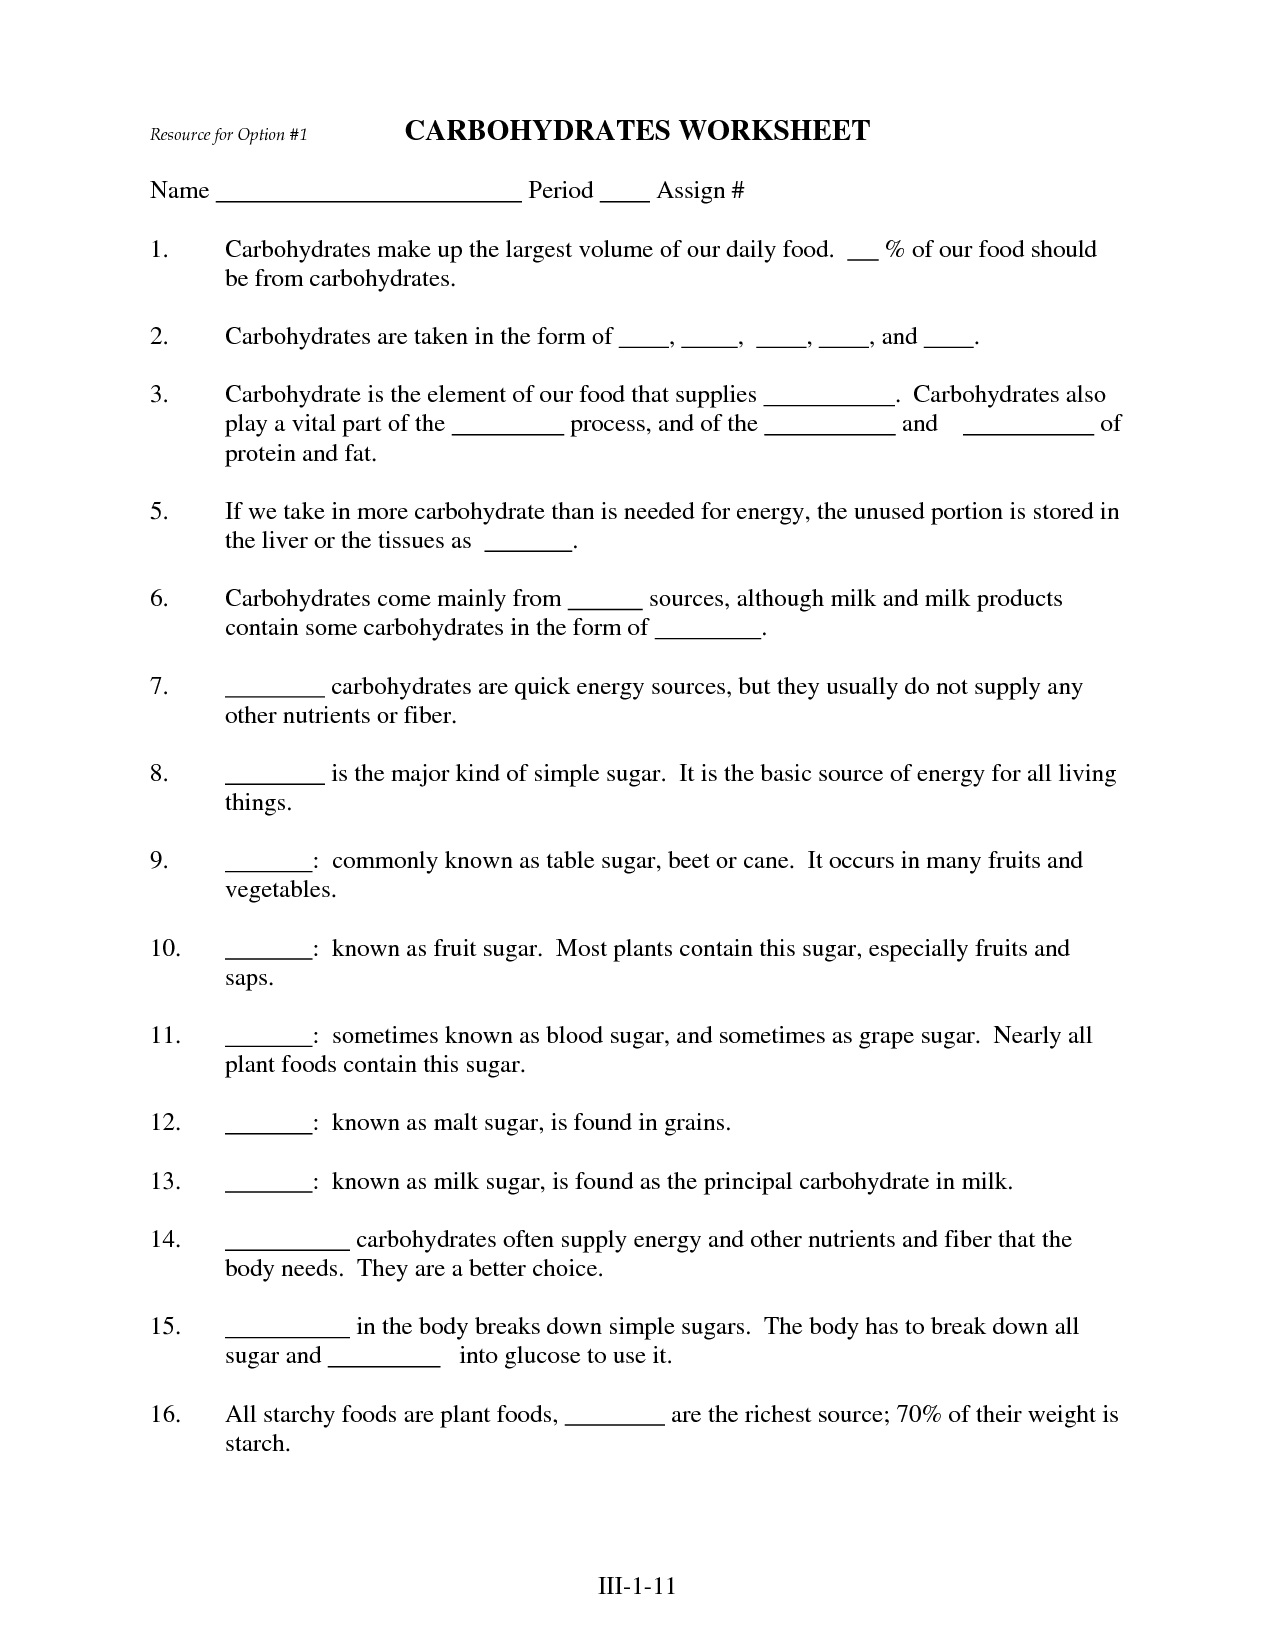 Carbohydrates Worksheet Answers